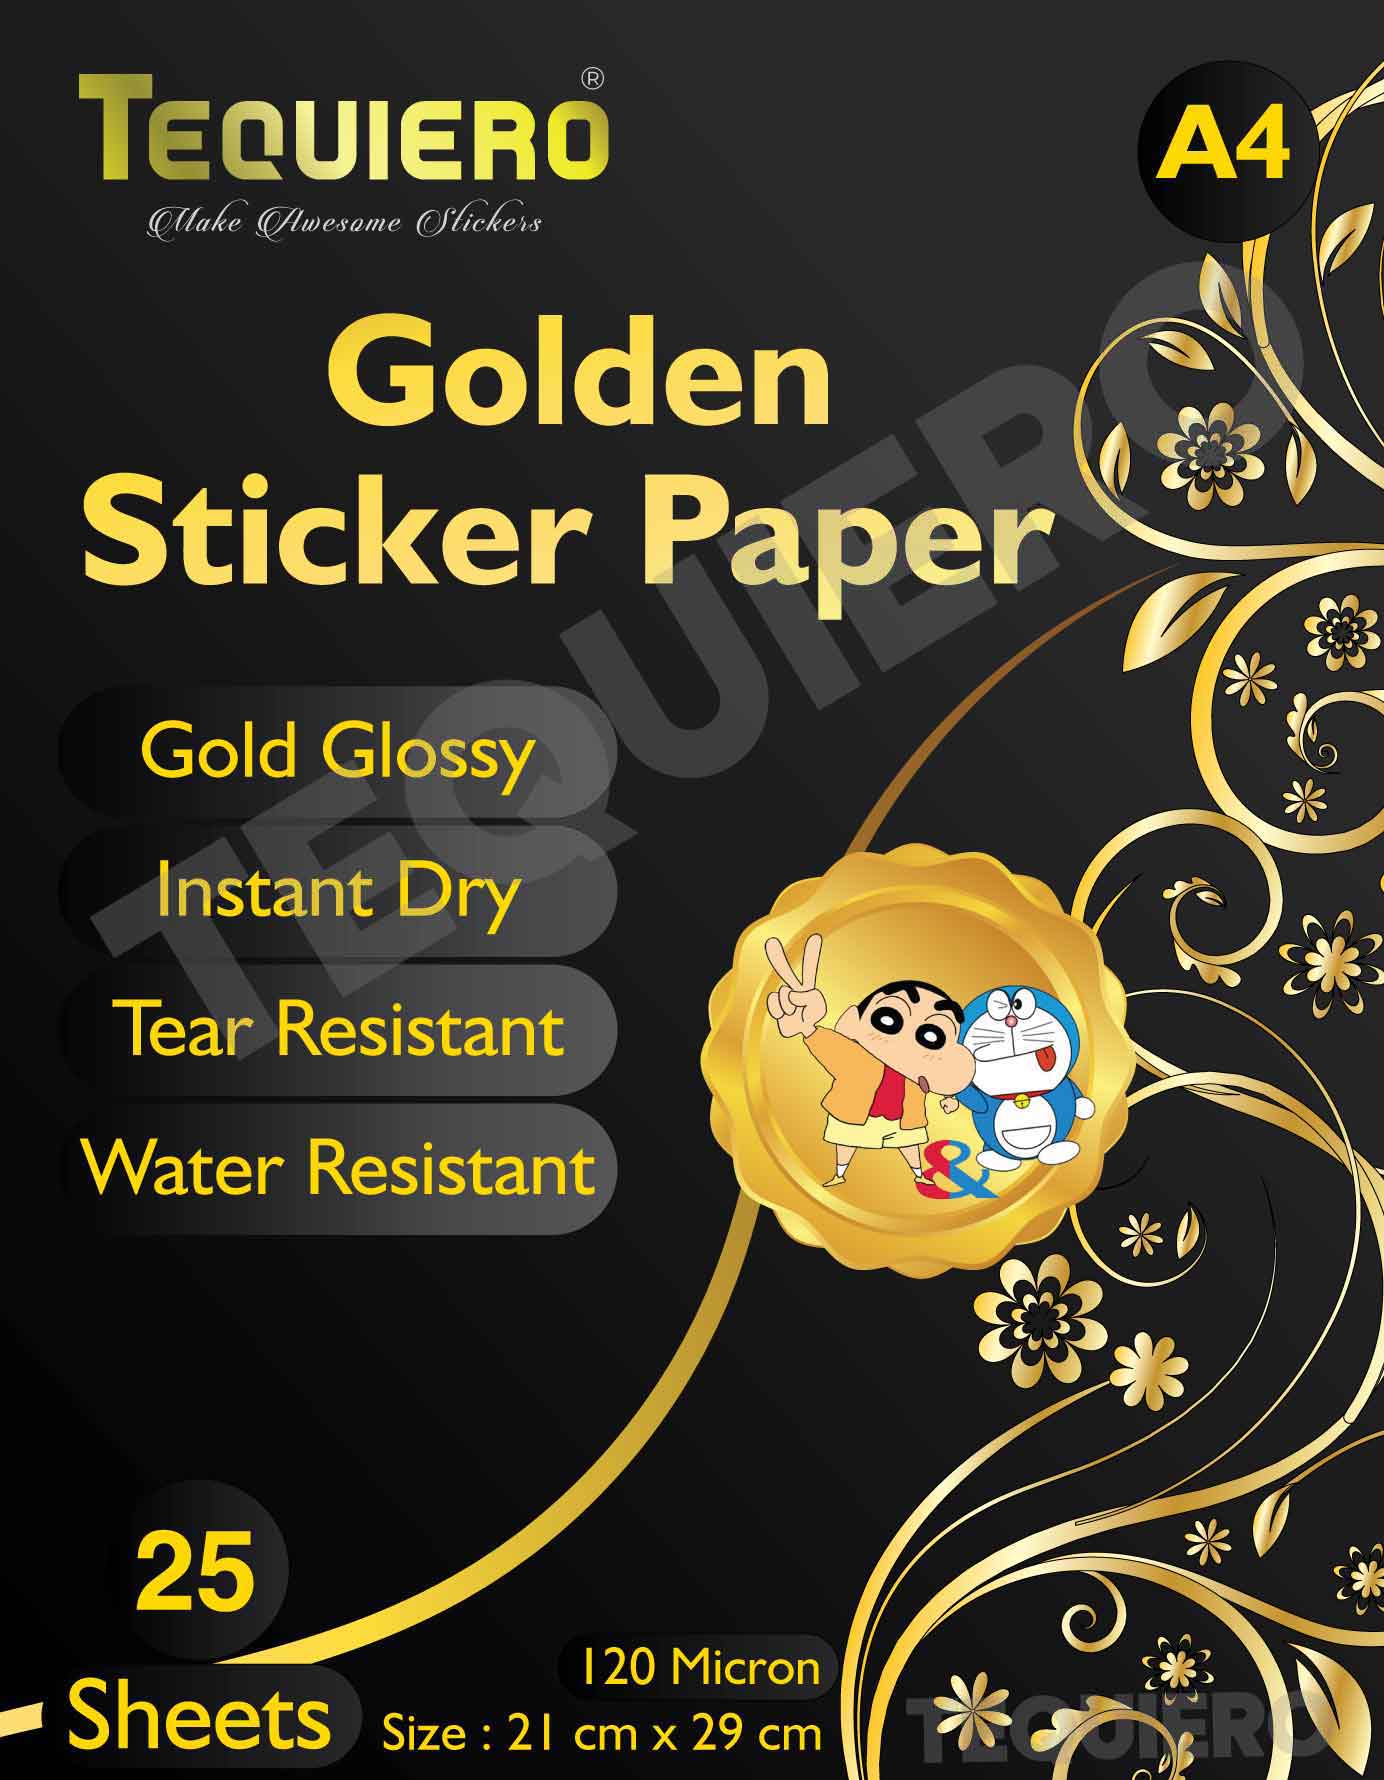 Golden Sticker Paper Printable A4 size for Inkjet and Laser Printers- 25 Sheets Pack